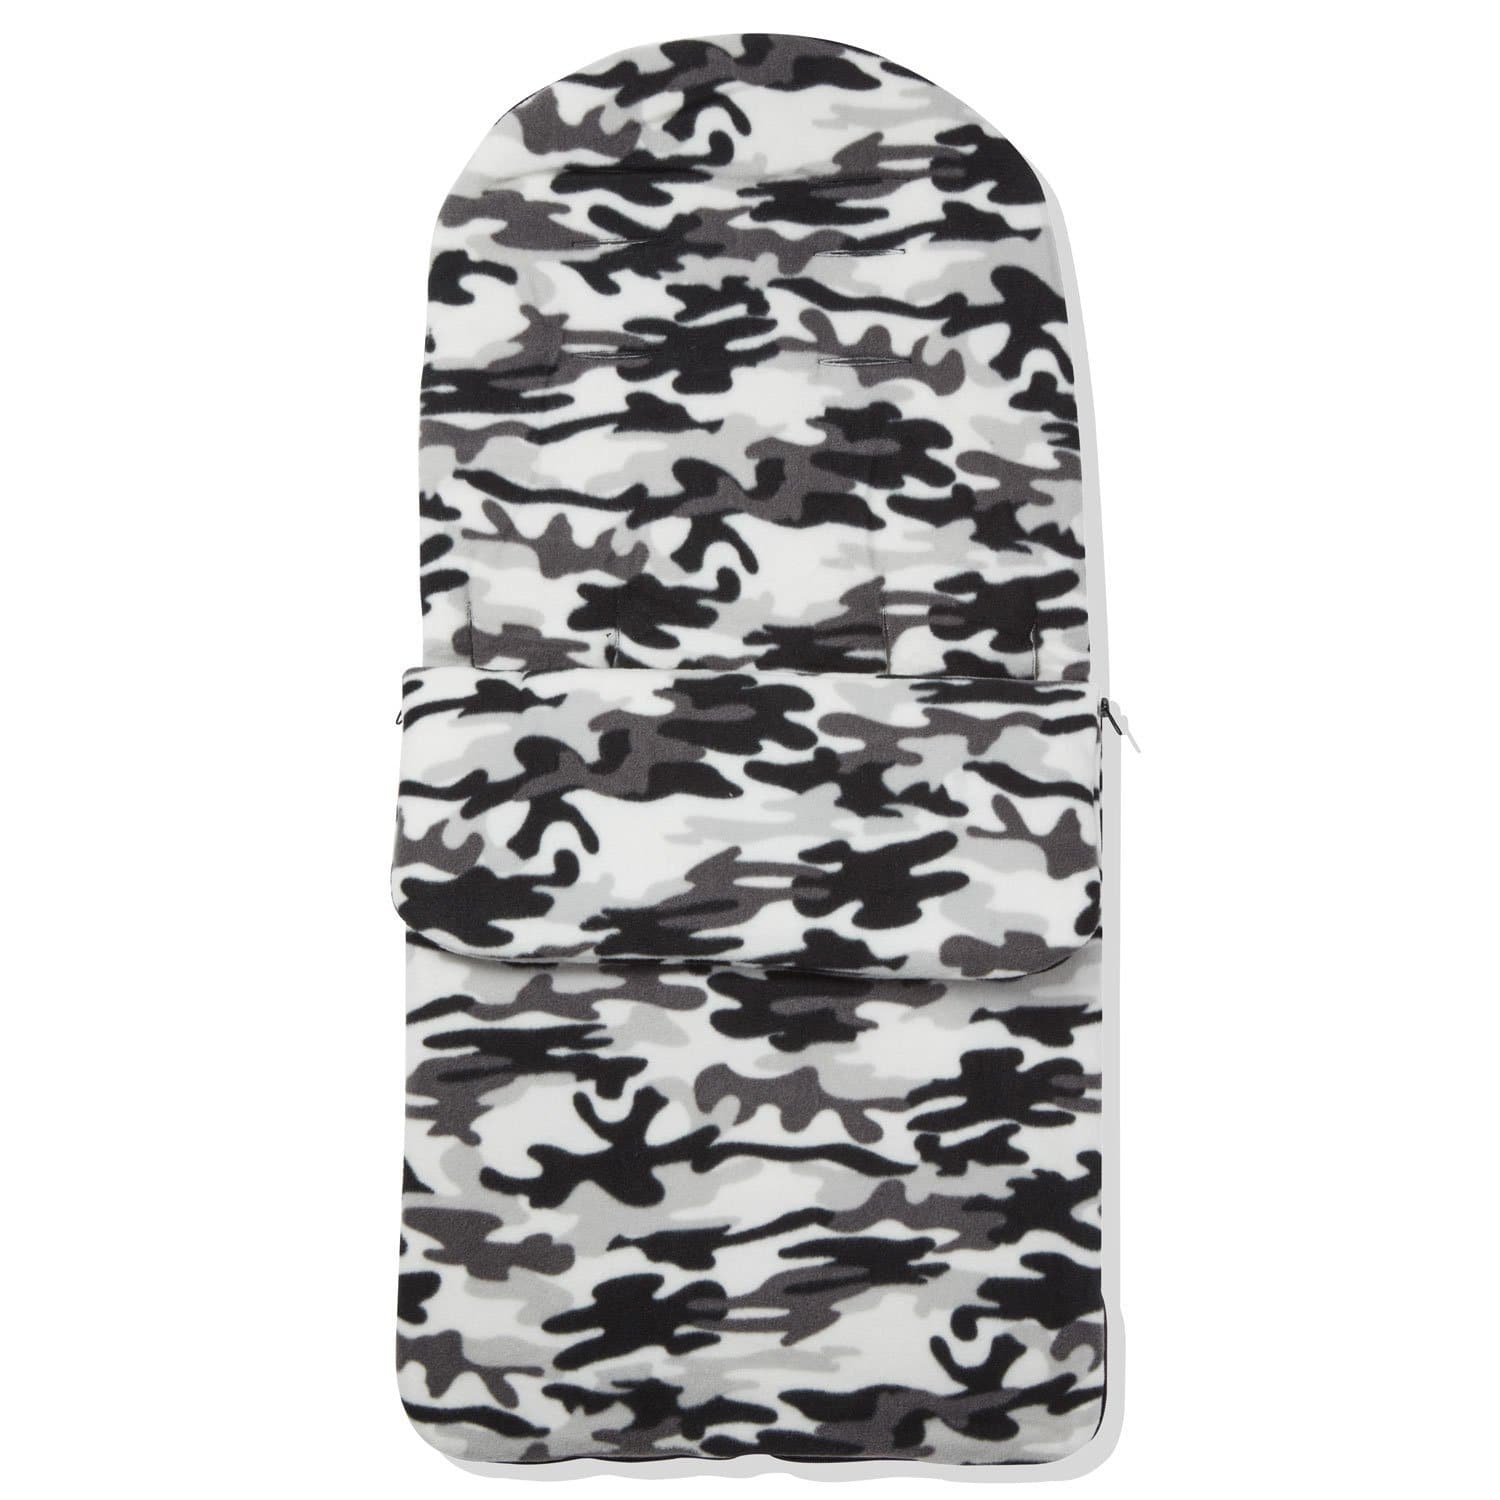 Fleece Footmuff / Cosy Toes Compatible with Zeta - Grey Camouflage / Fits All Models | For Your Little One